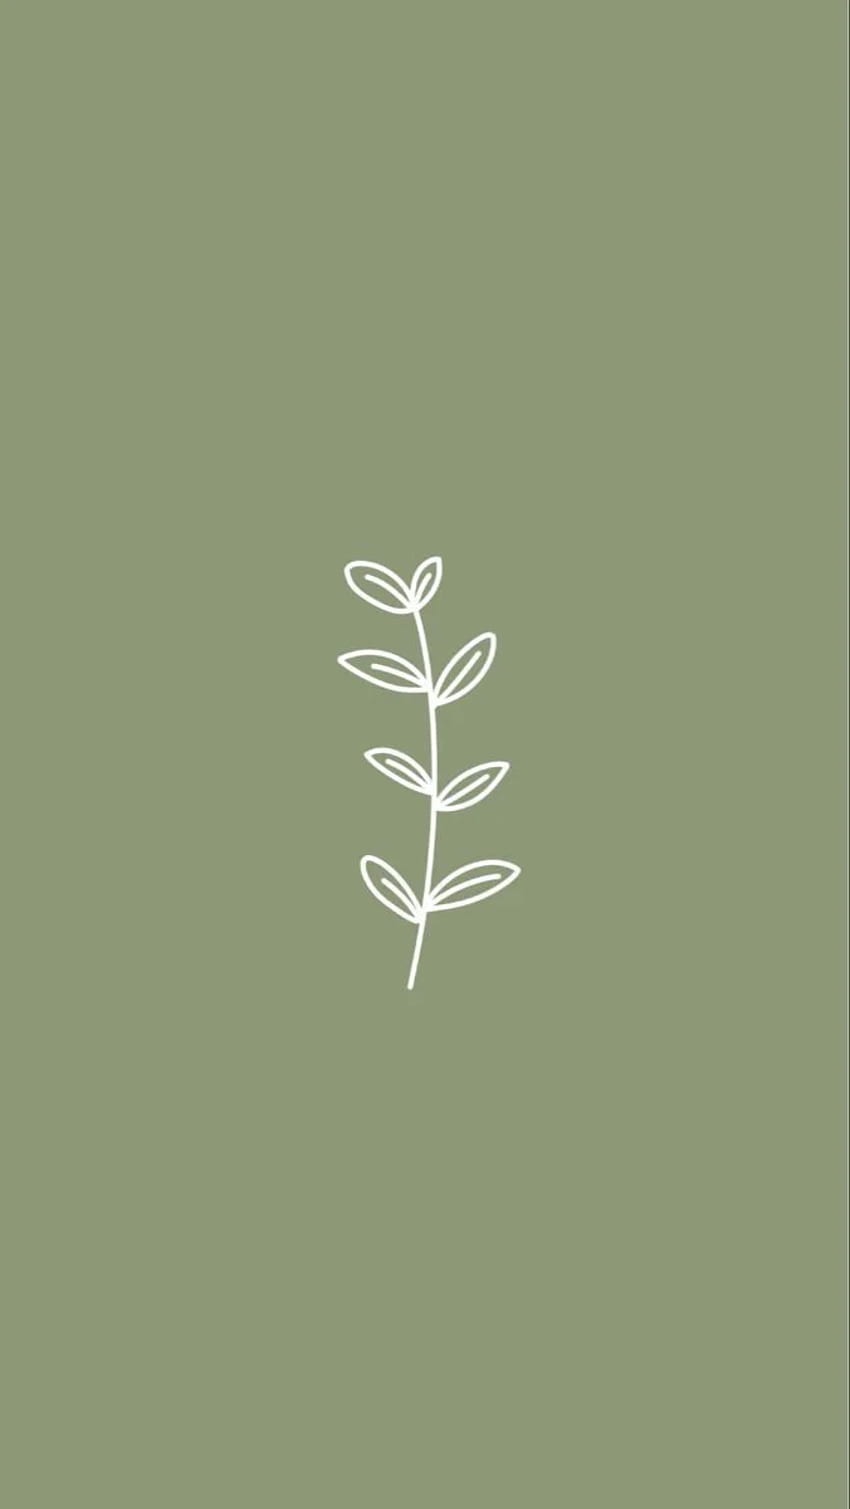 A simple logo for an herbal company - Green, sage green, light green